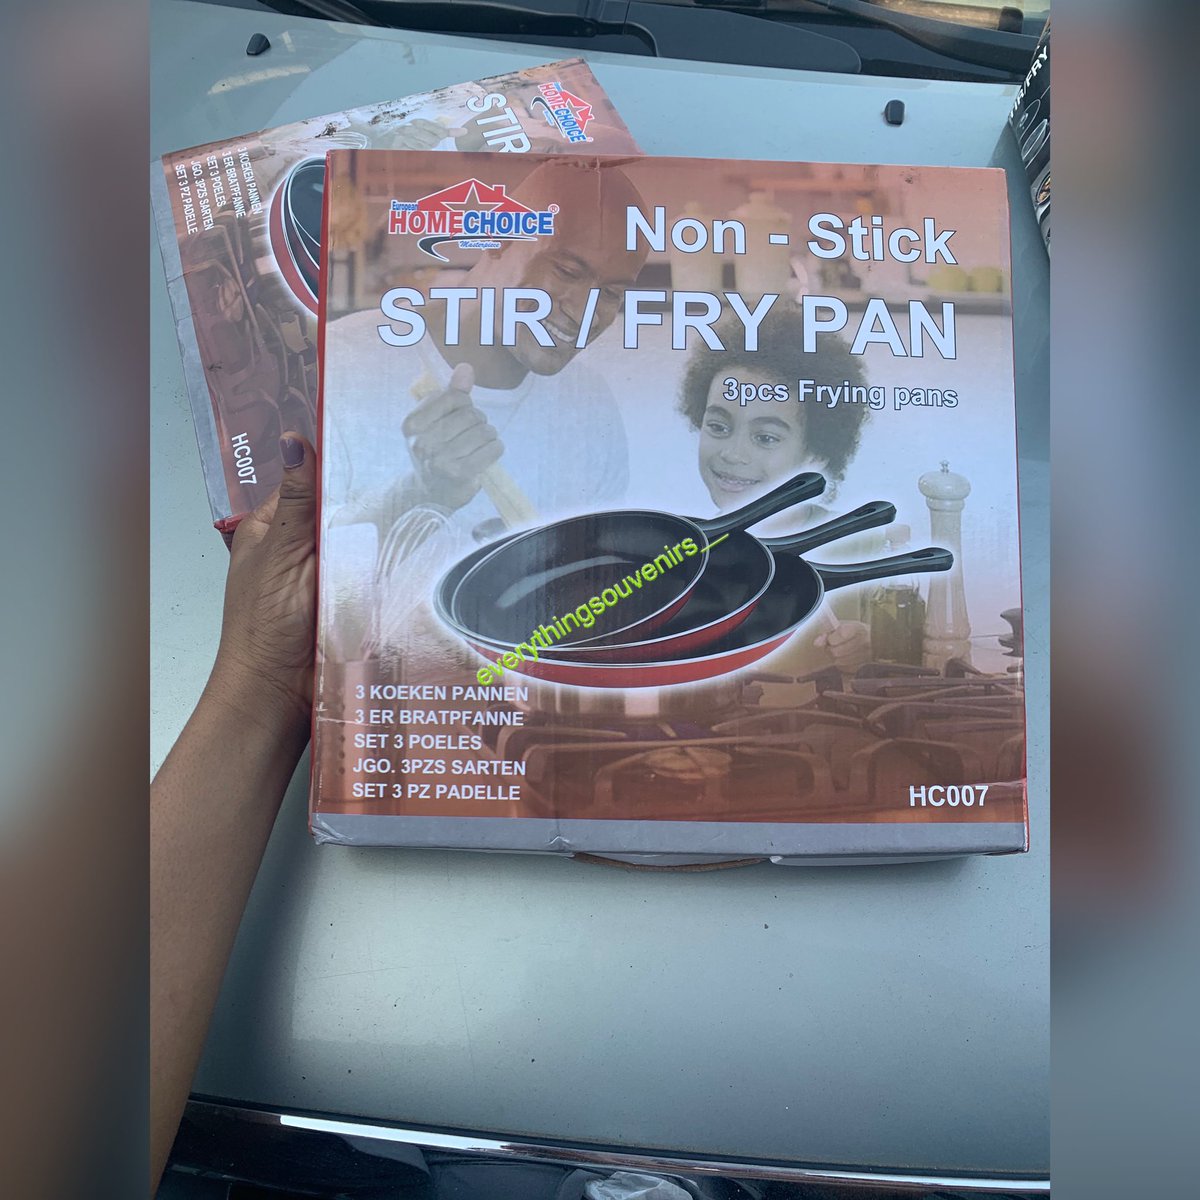 Home choice 3pcs non stick stir fry pan still available...Price- 3000 (for 3 pans)Please RT